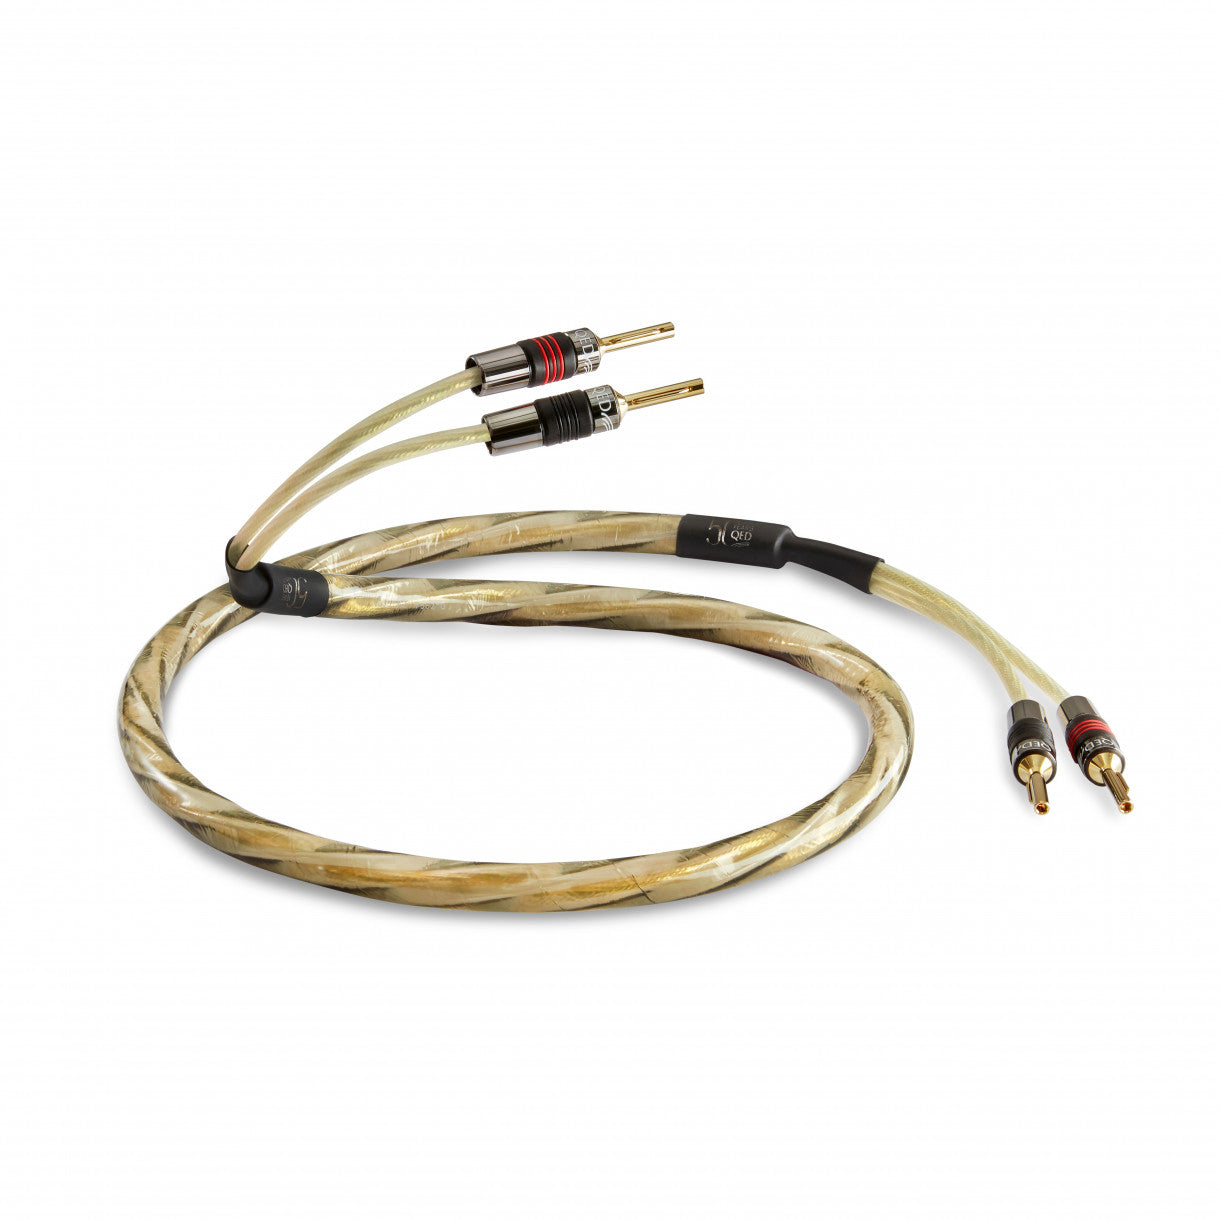 QED Golden Anniversary XT speaker cable pair